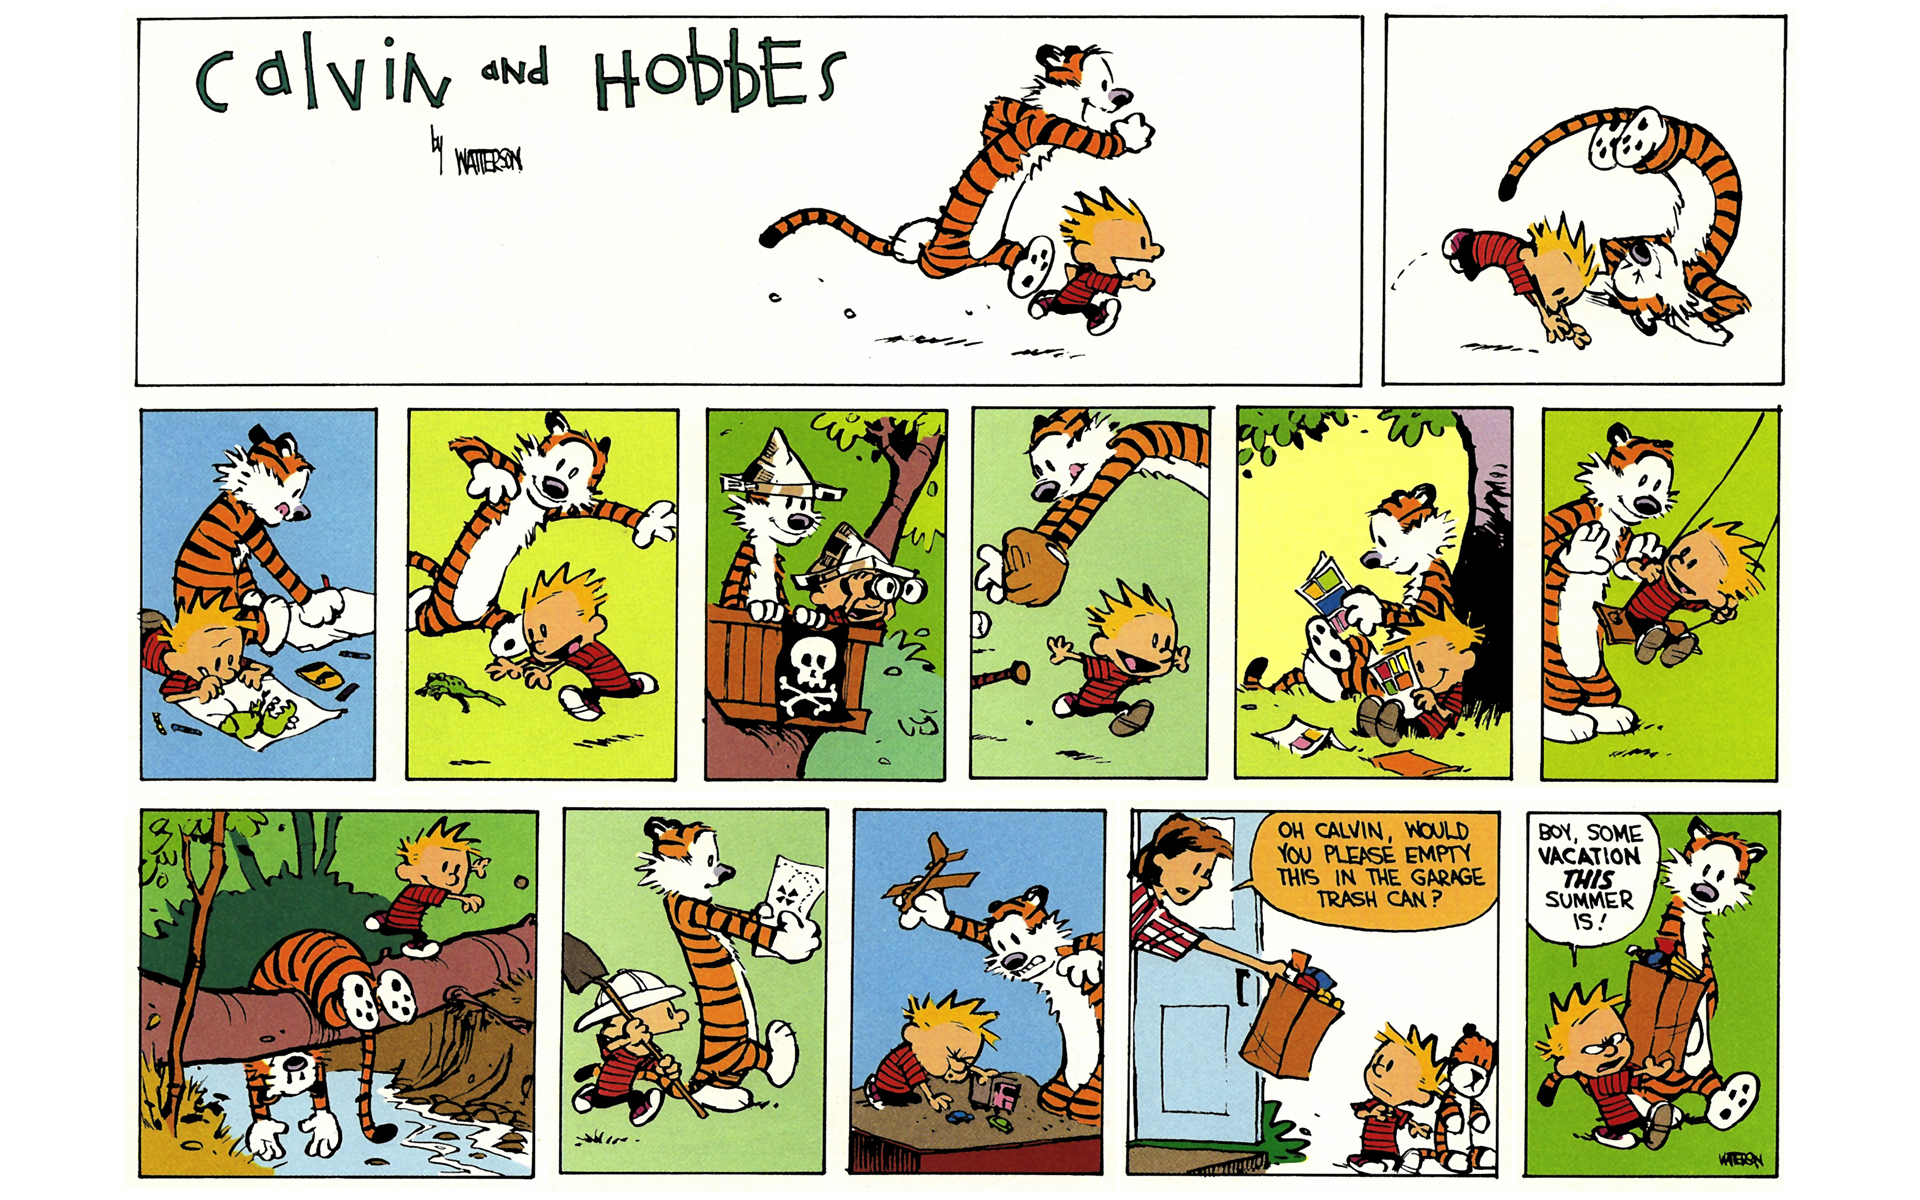 Read online Calvin and Hobbes comic - Issue #6 - 163.